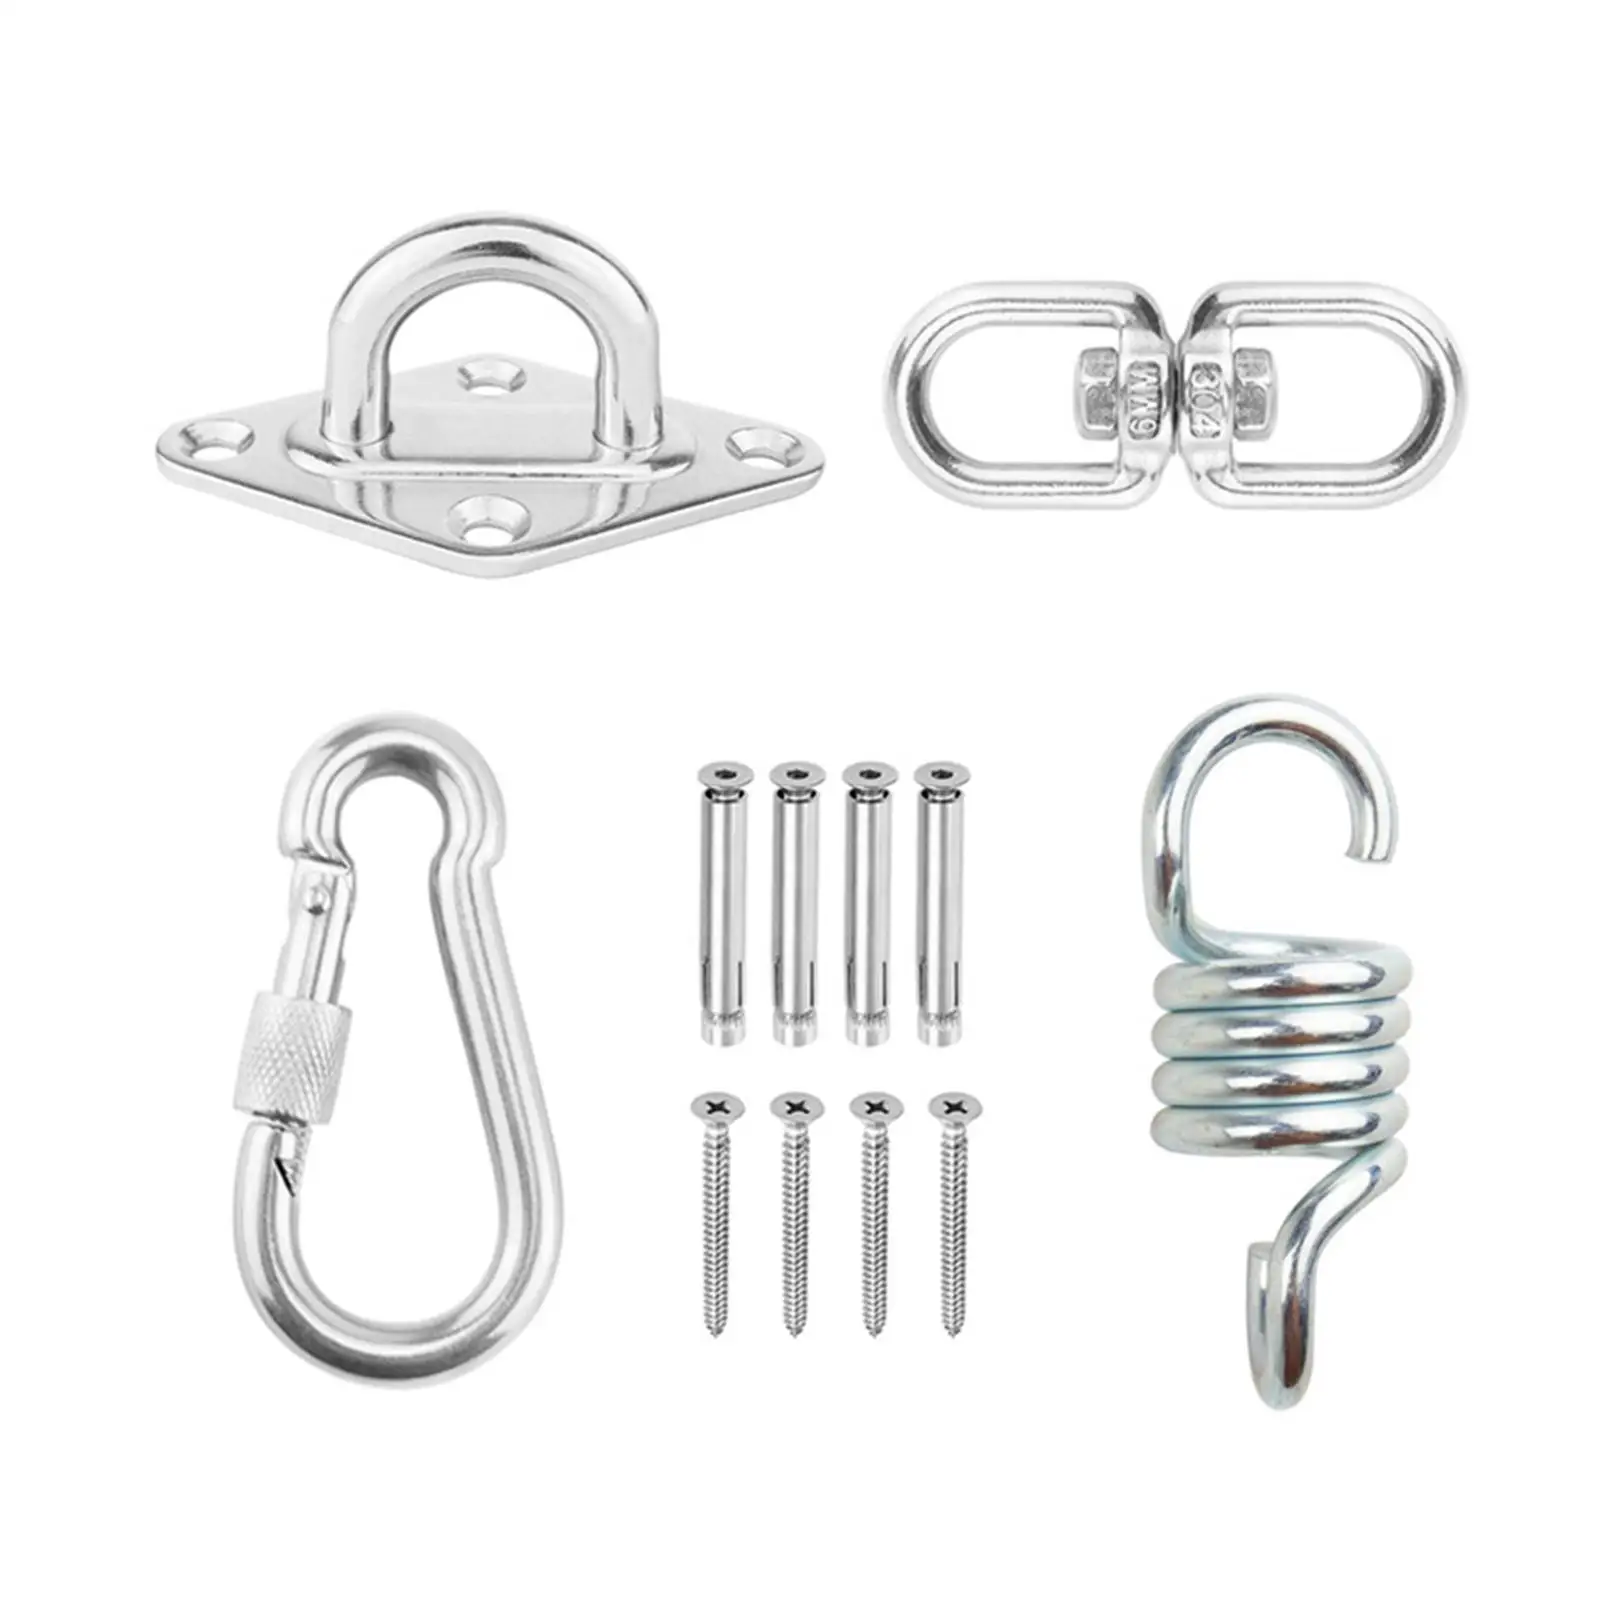 Hammock Chair Hanging Kit Stainless Steel Heavy Duty Good Weight Bearing 500lbs Sturdy Carabiner and Screws Ceiling Hook Hanger